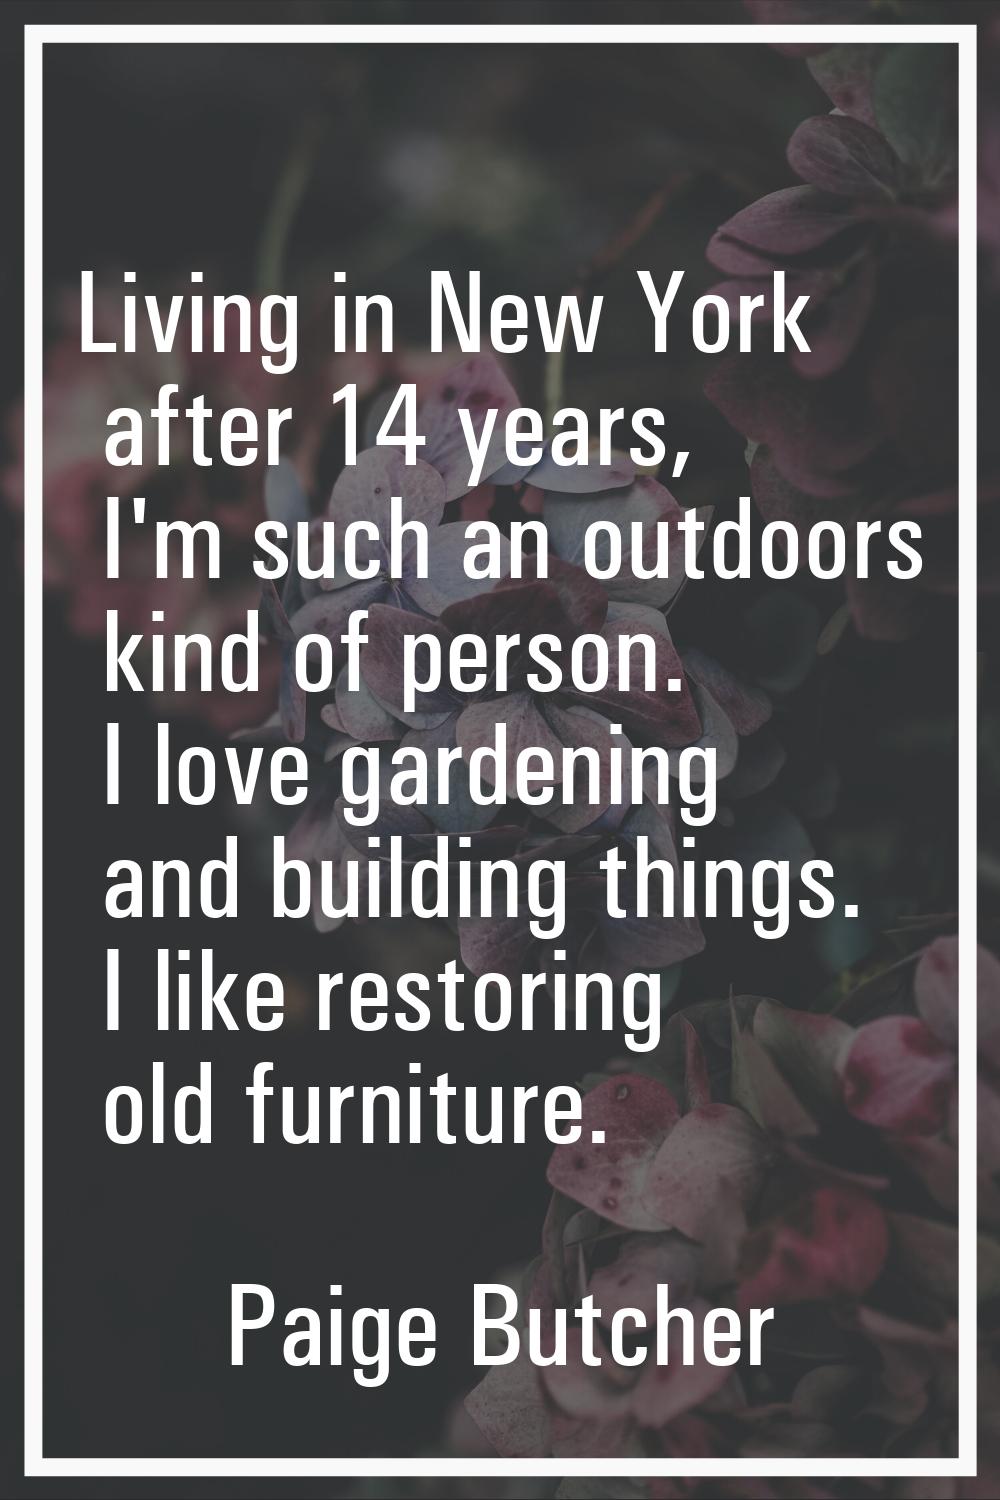 Living in New York after 14 years, I'm such an outdoors kind of person. I love gardening and buildi